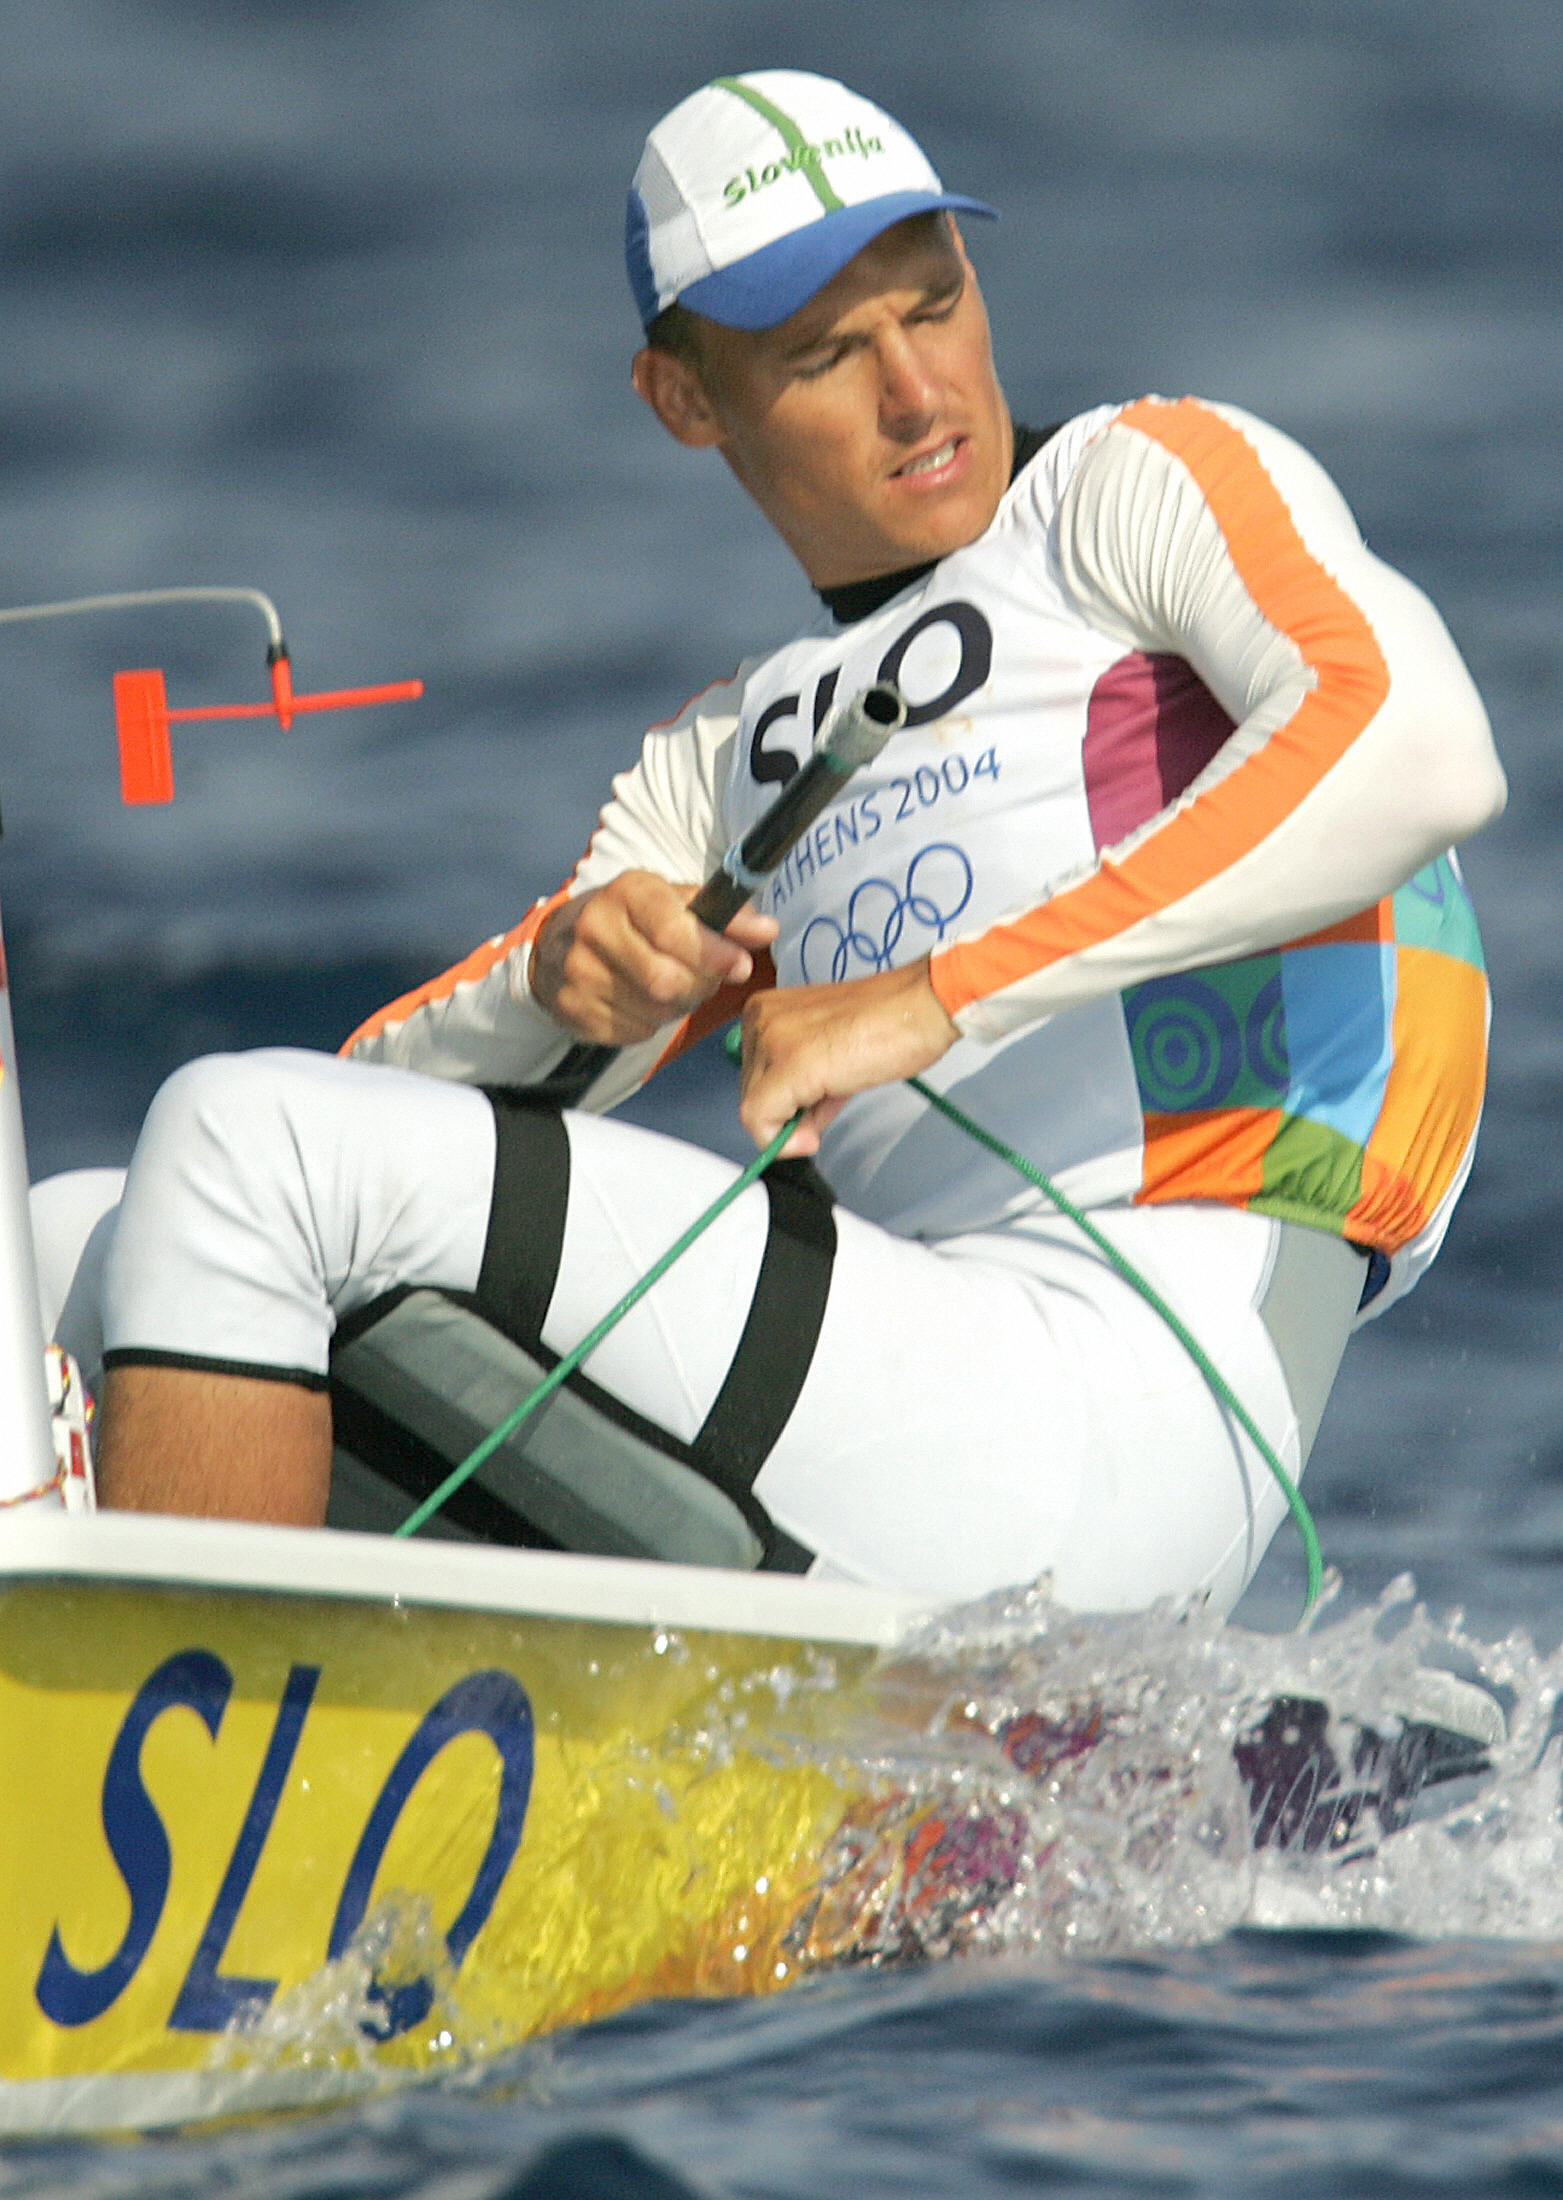 Athens, GREECE: Slovenia's Vasilij Zbogar races during the Men's Single-handed Dinghy-Laser class race Nine, 20 August 2004, on the seventh day of competition in the 2004 Olympic Games in Athens. AFP PHOTO / Menahem KAHANA (Photo credit should read MENAHEM KAHANA/AFP/Getty Images)